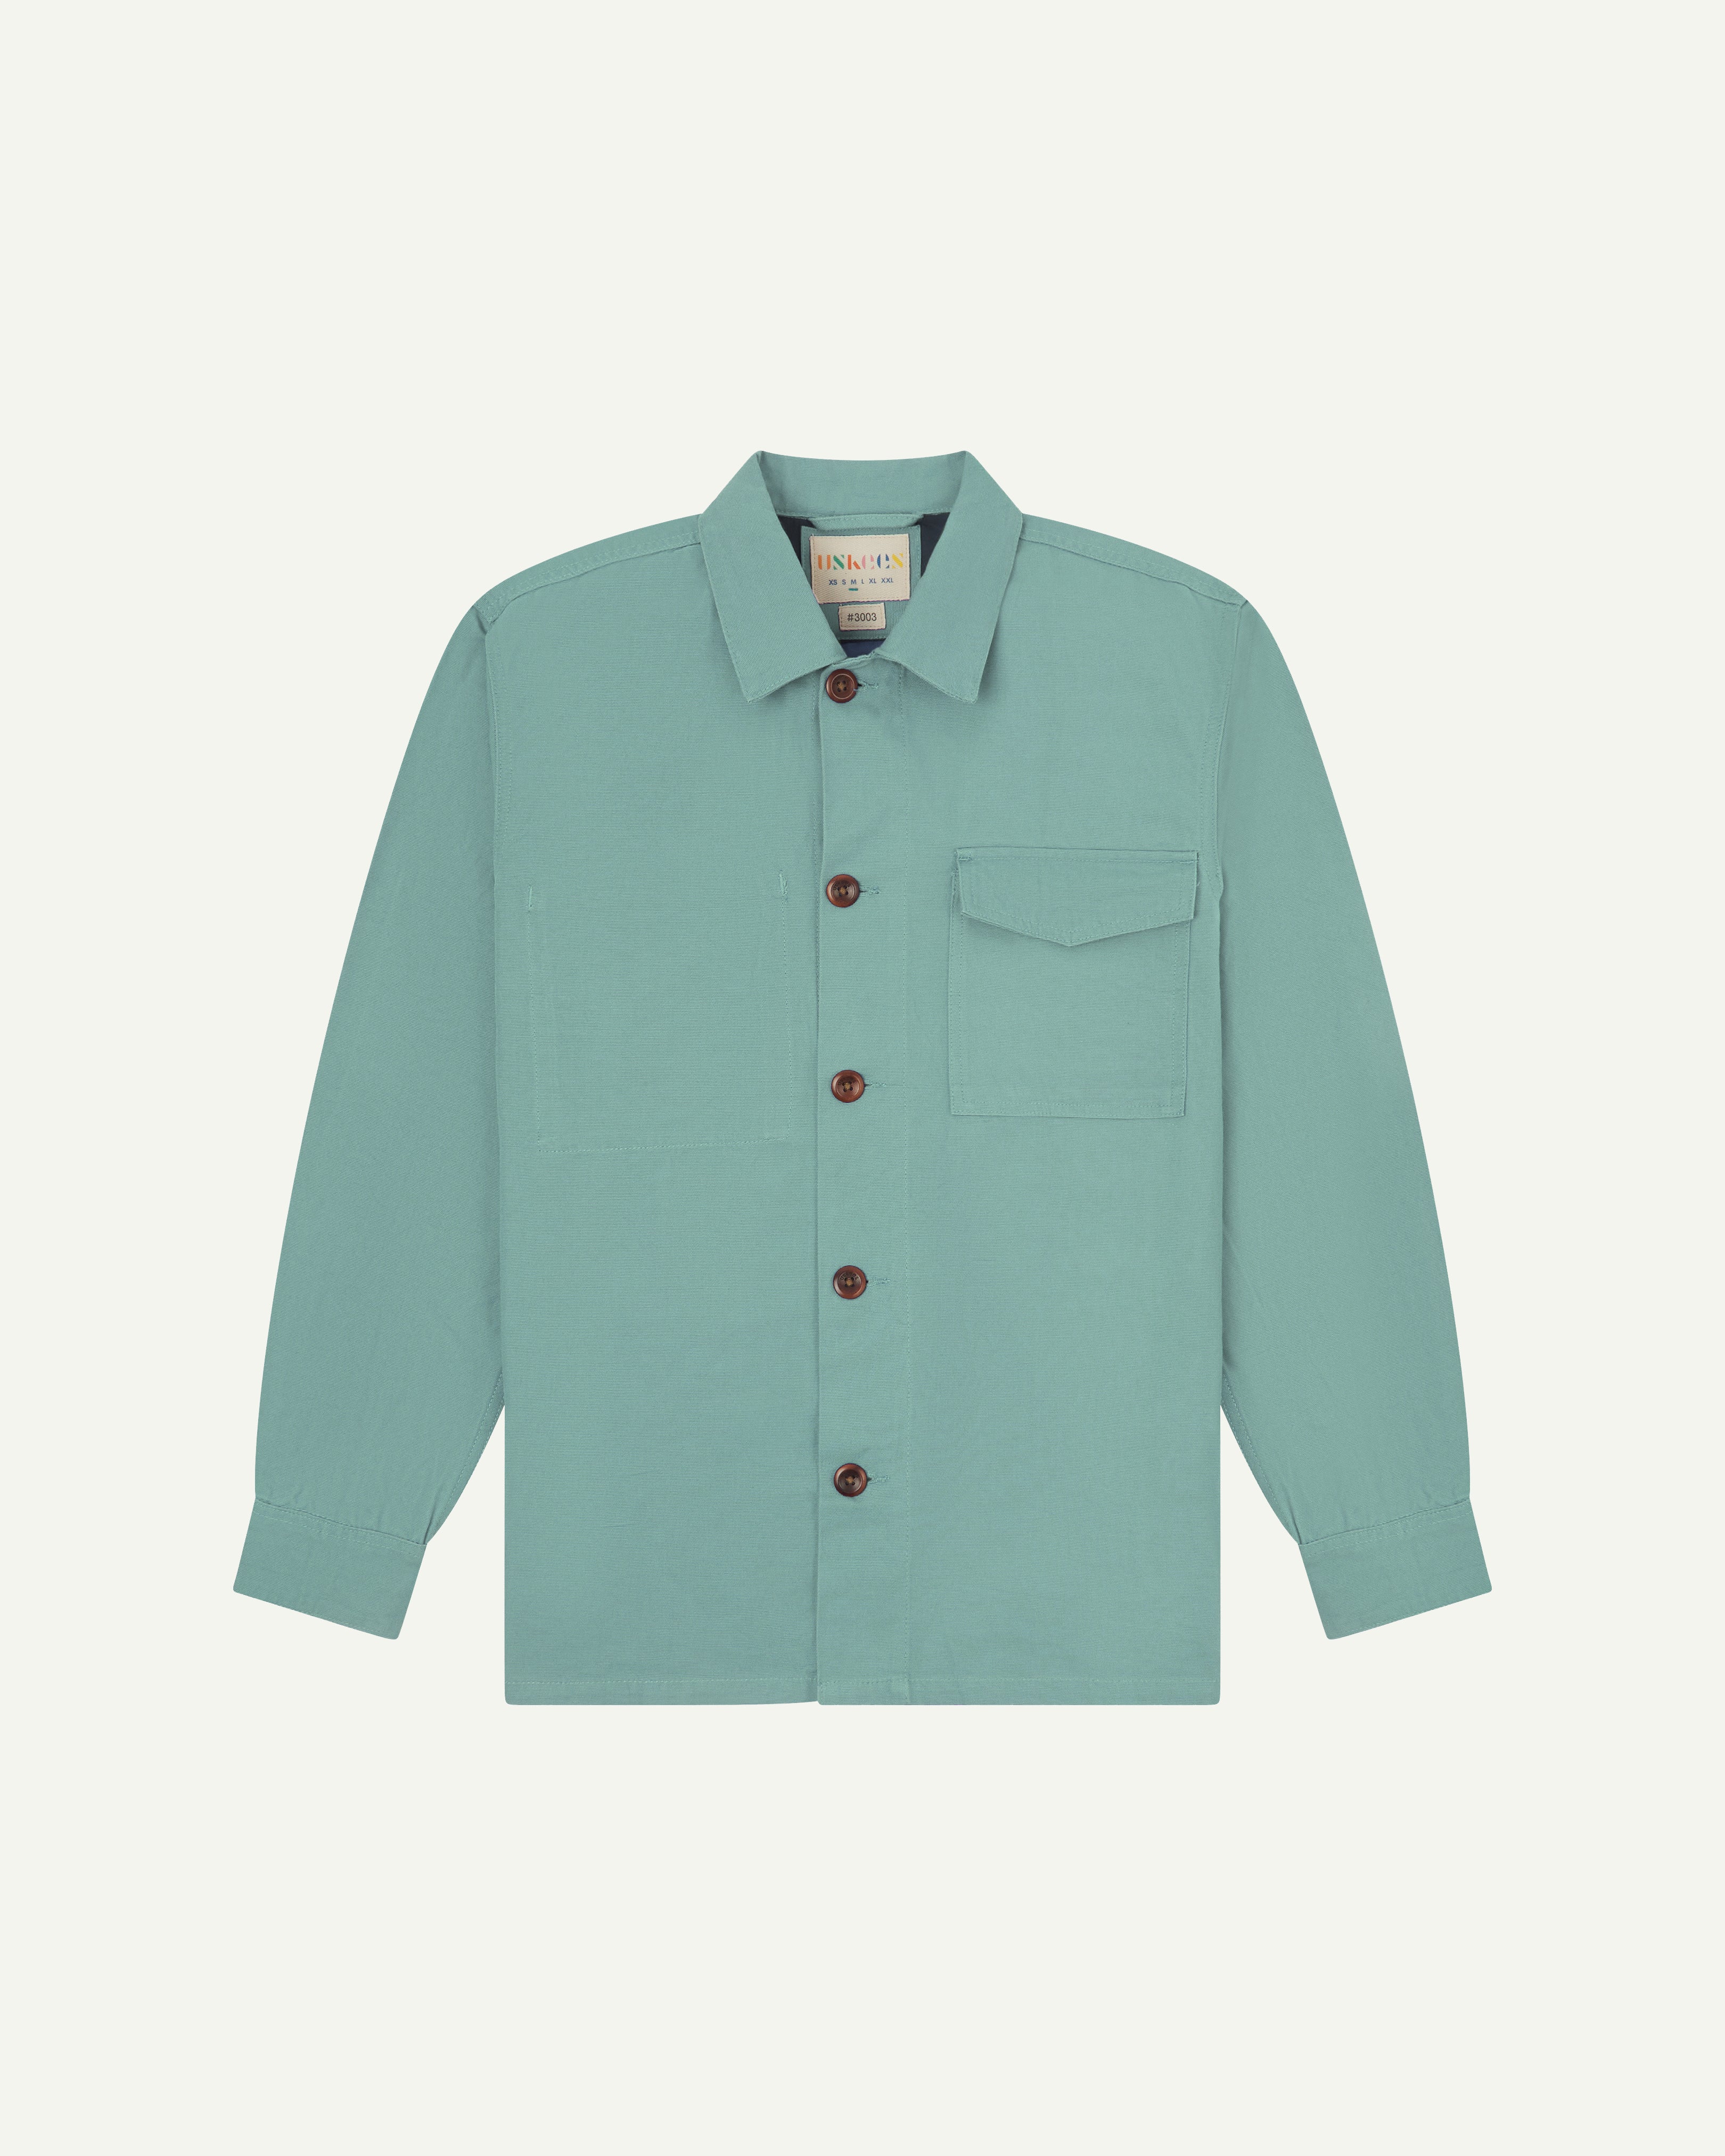 Front flat shot of pale green #3003 workshirt from Uskees. Showing chest pocket with flap and corozo buttons.